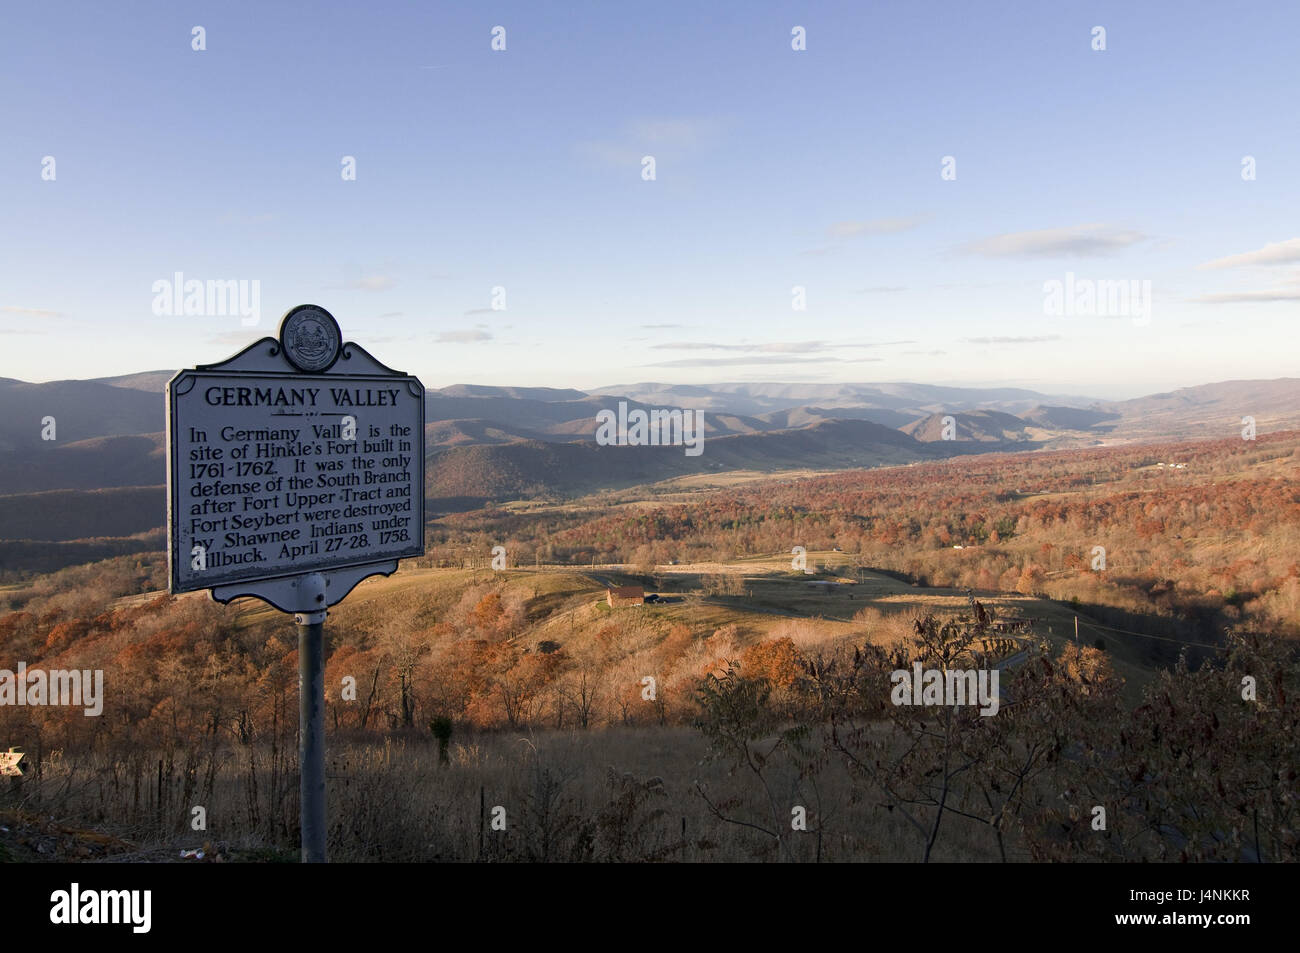 The USA, West Virginia, Allegheny Mountains, scenery, view, sign, 'Germany Valley', Stock Photo